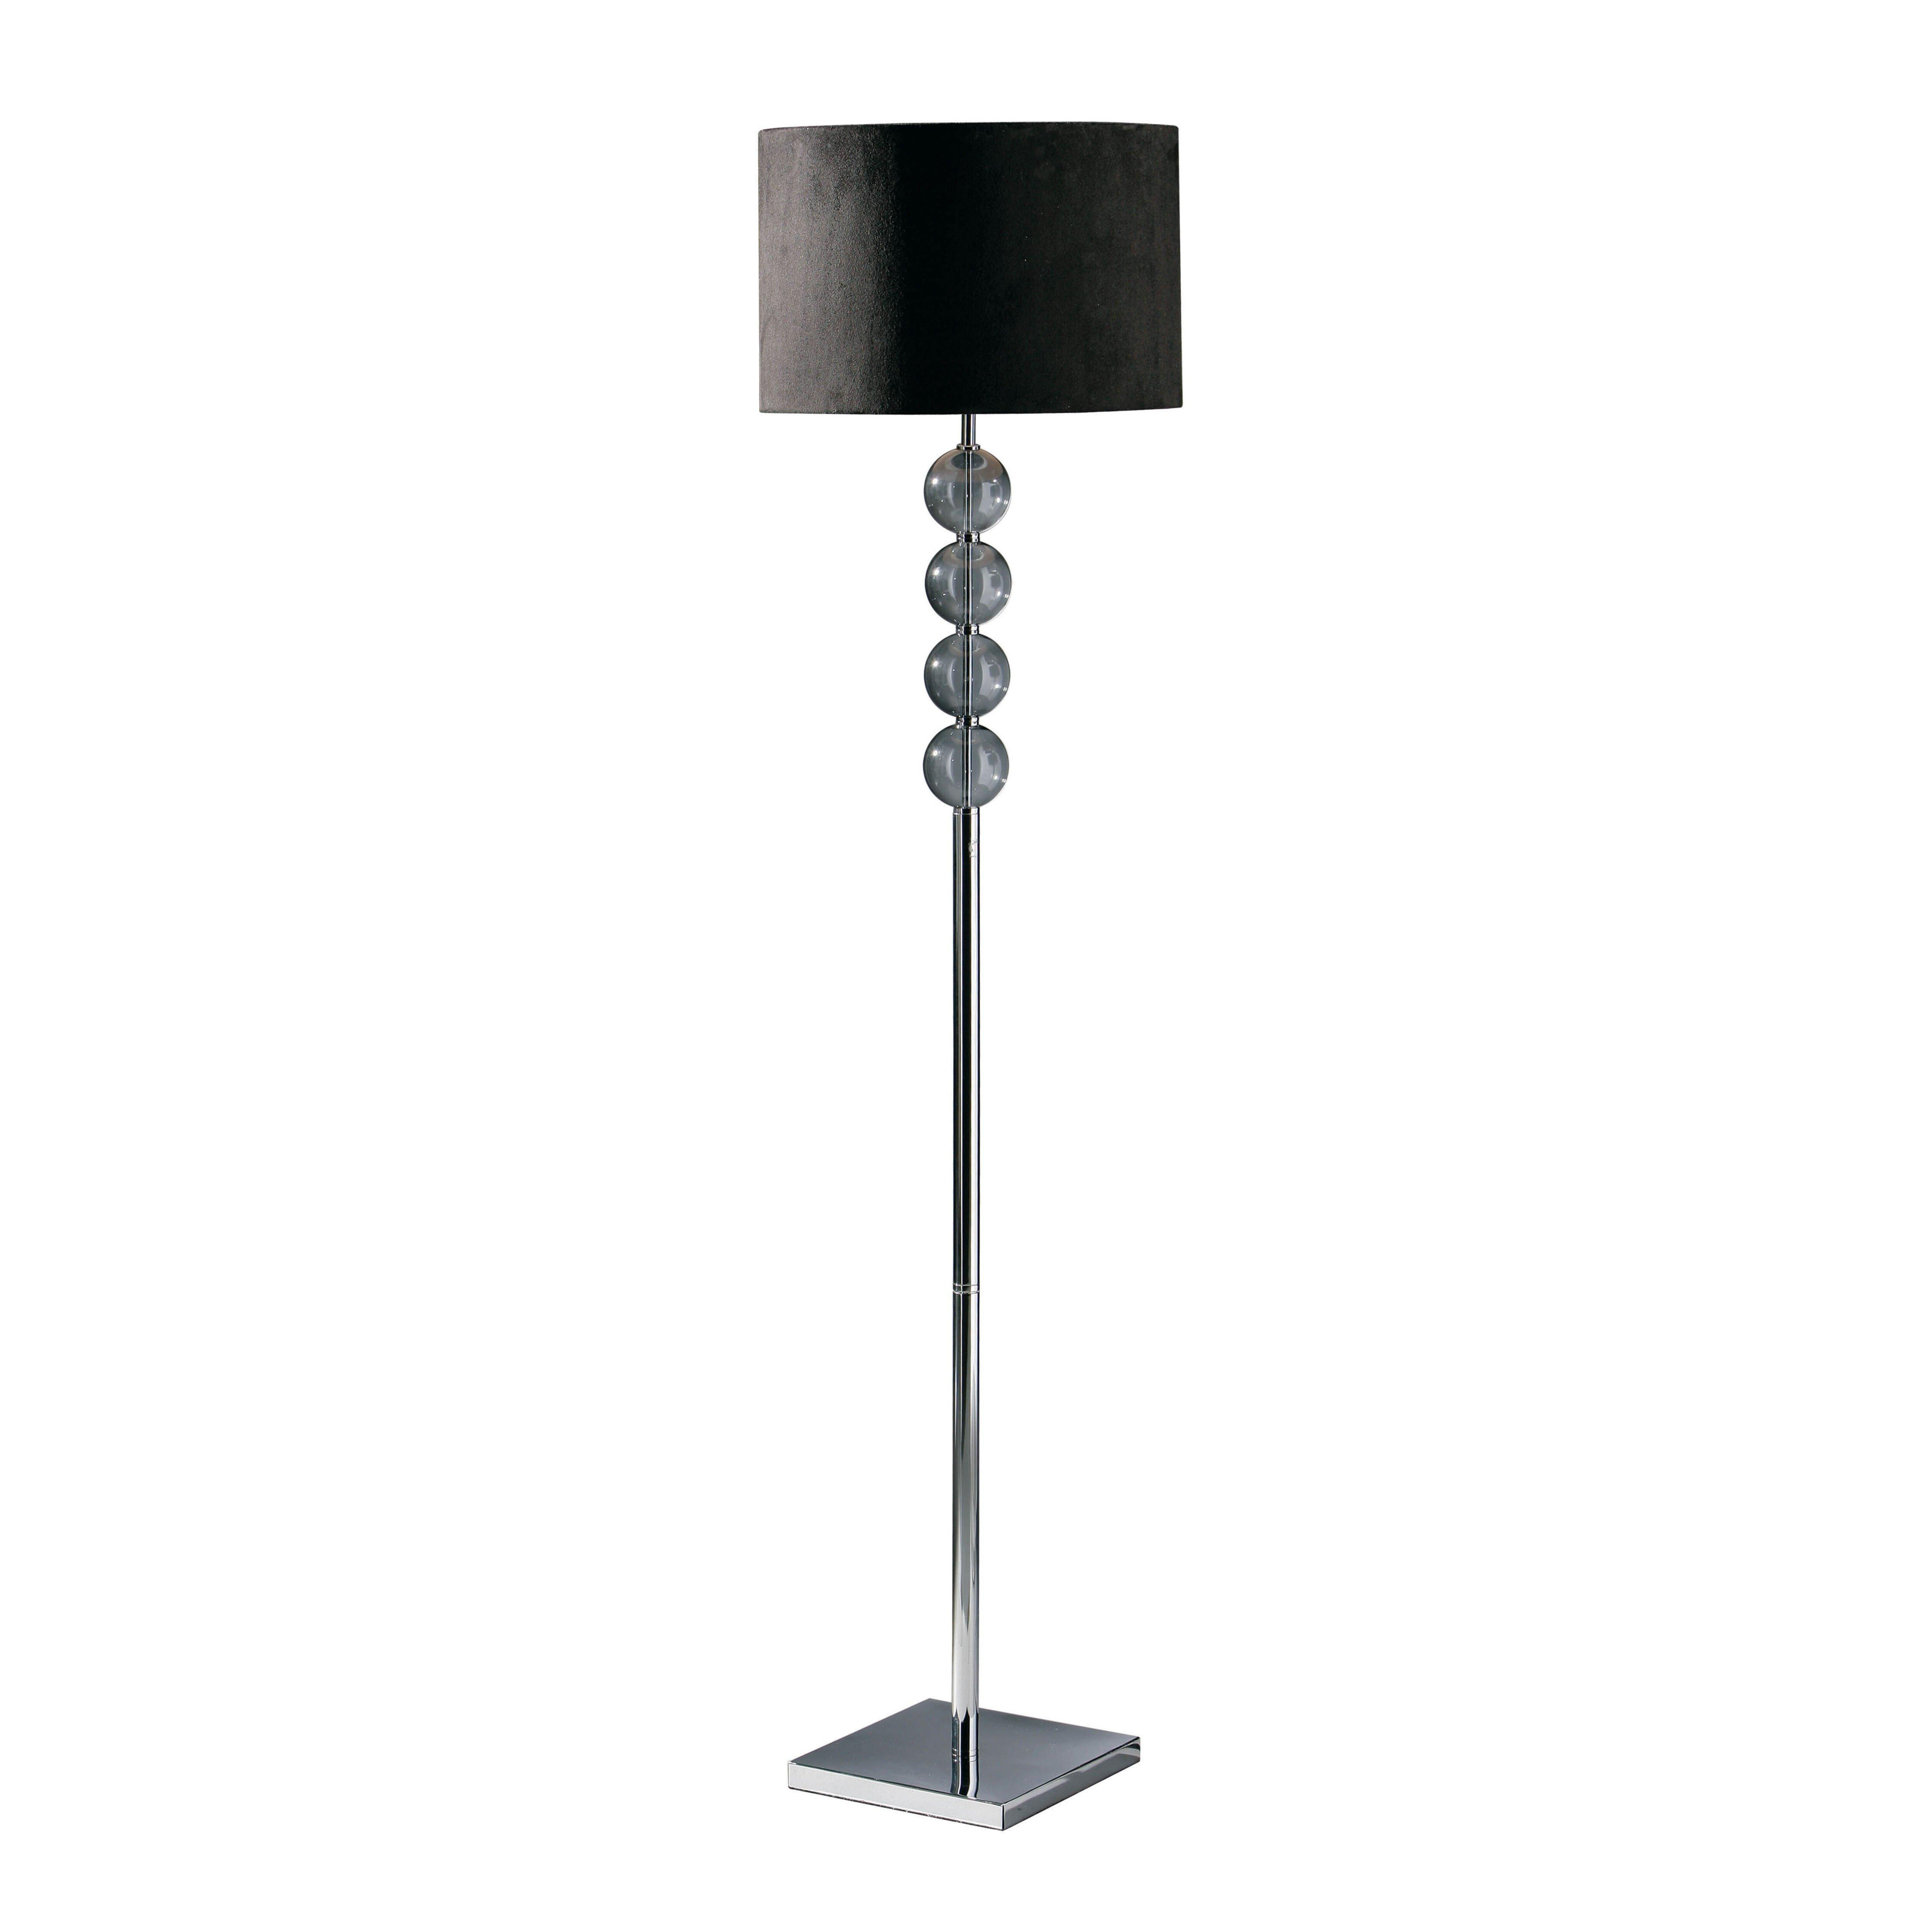 Interiors by Premier Mistro Suede Effect Shade Floor Lamp - image 1